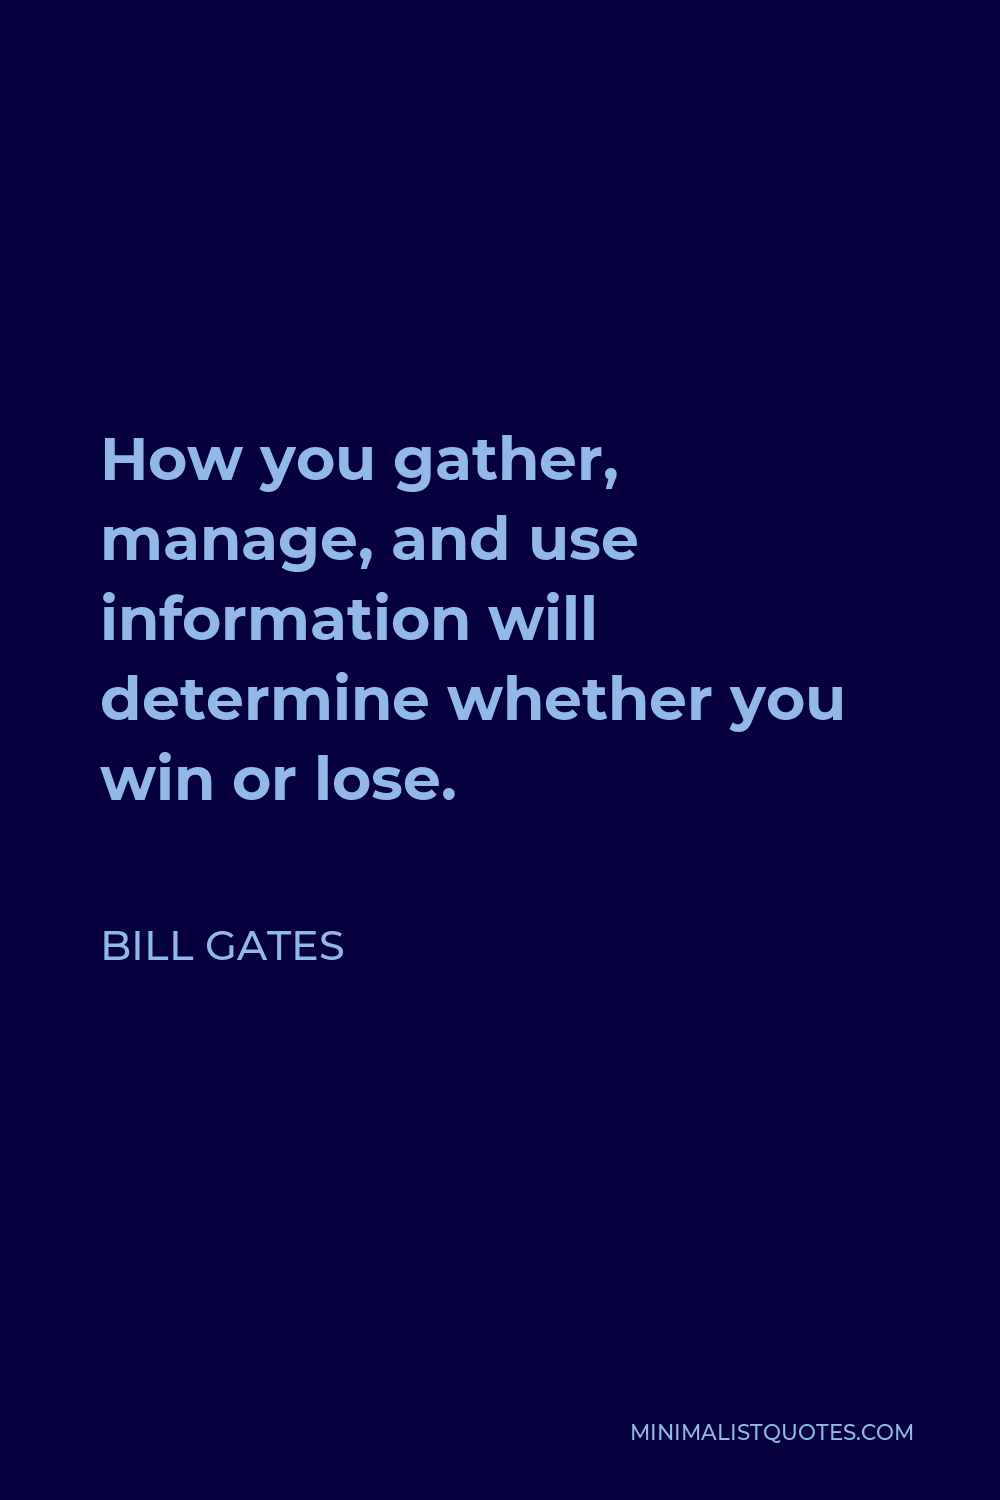 Bill Gates Quote - How you gather, manage, and use information will determine whether you win or lose.